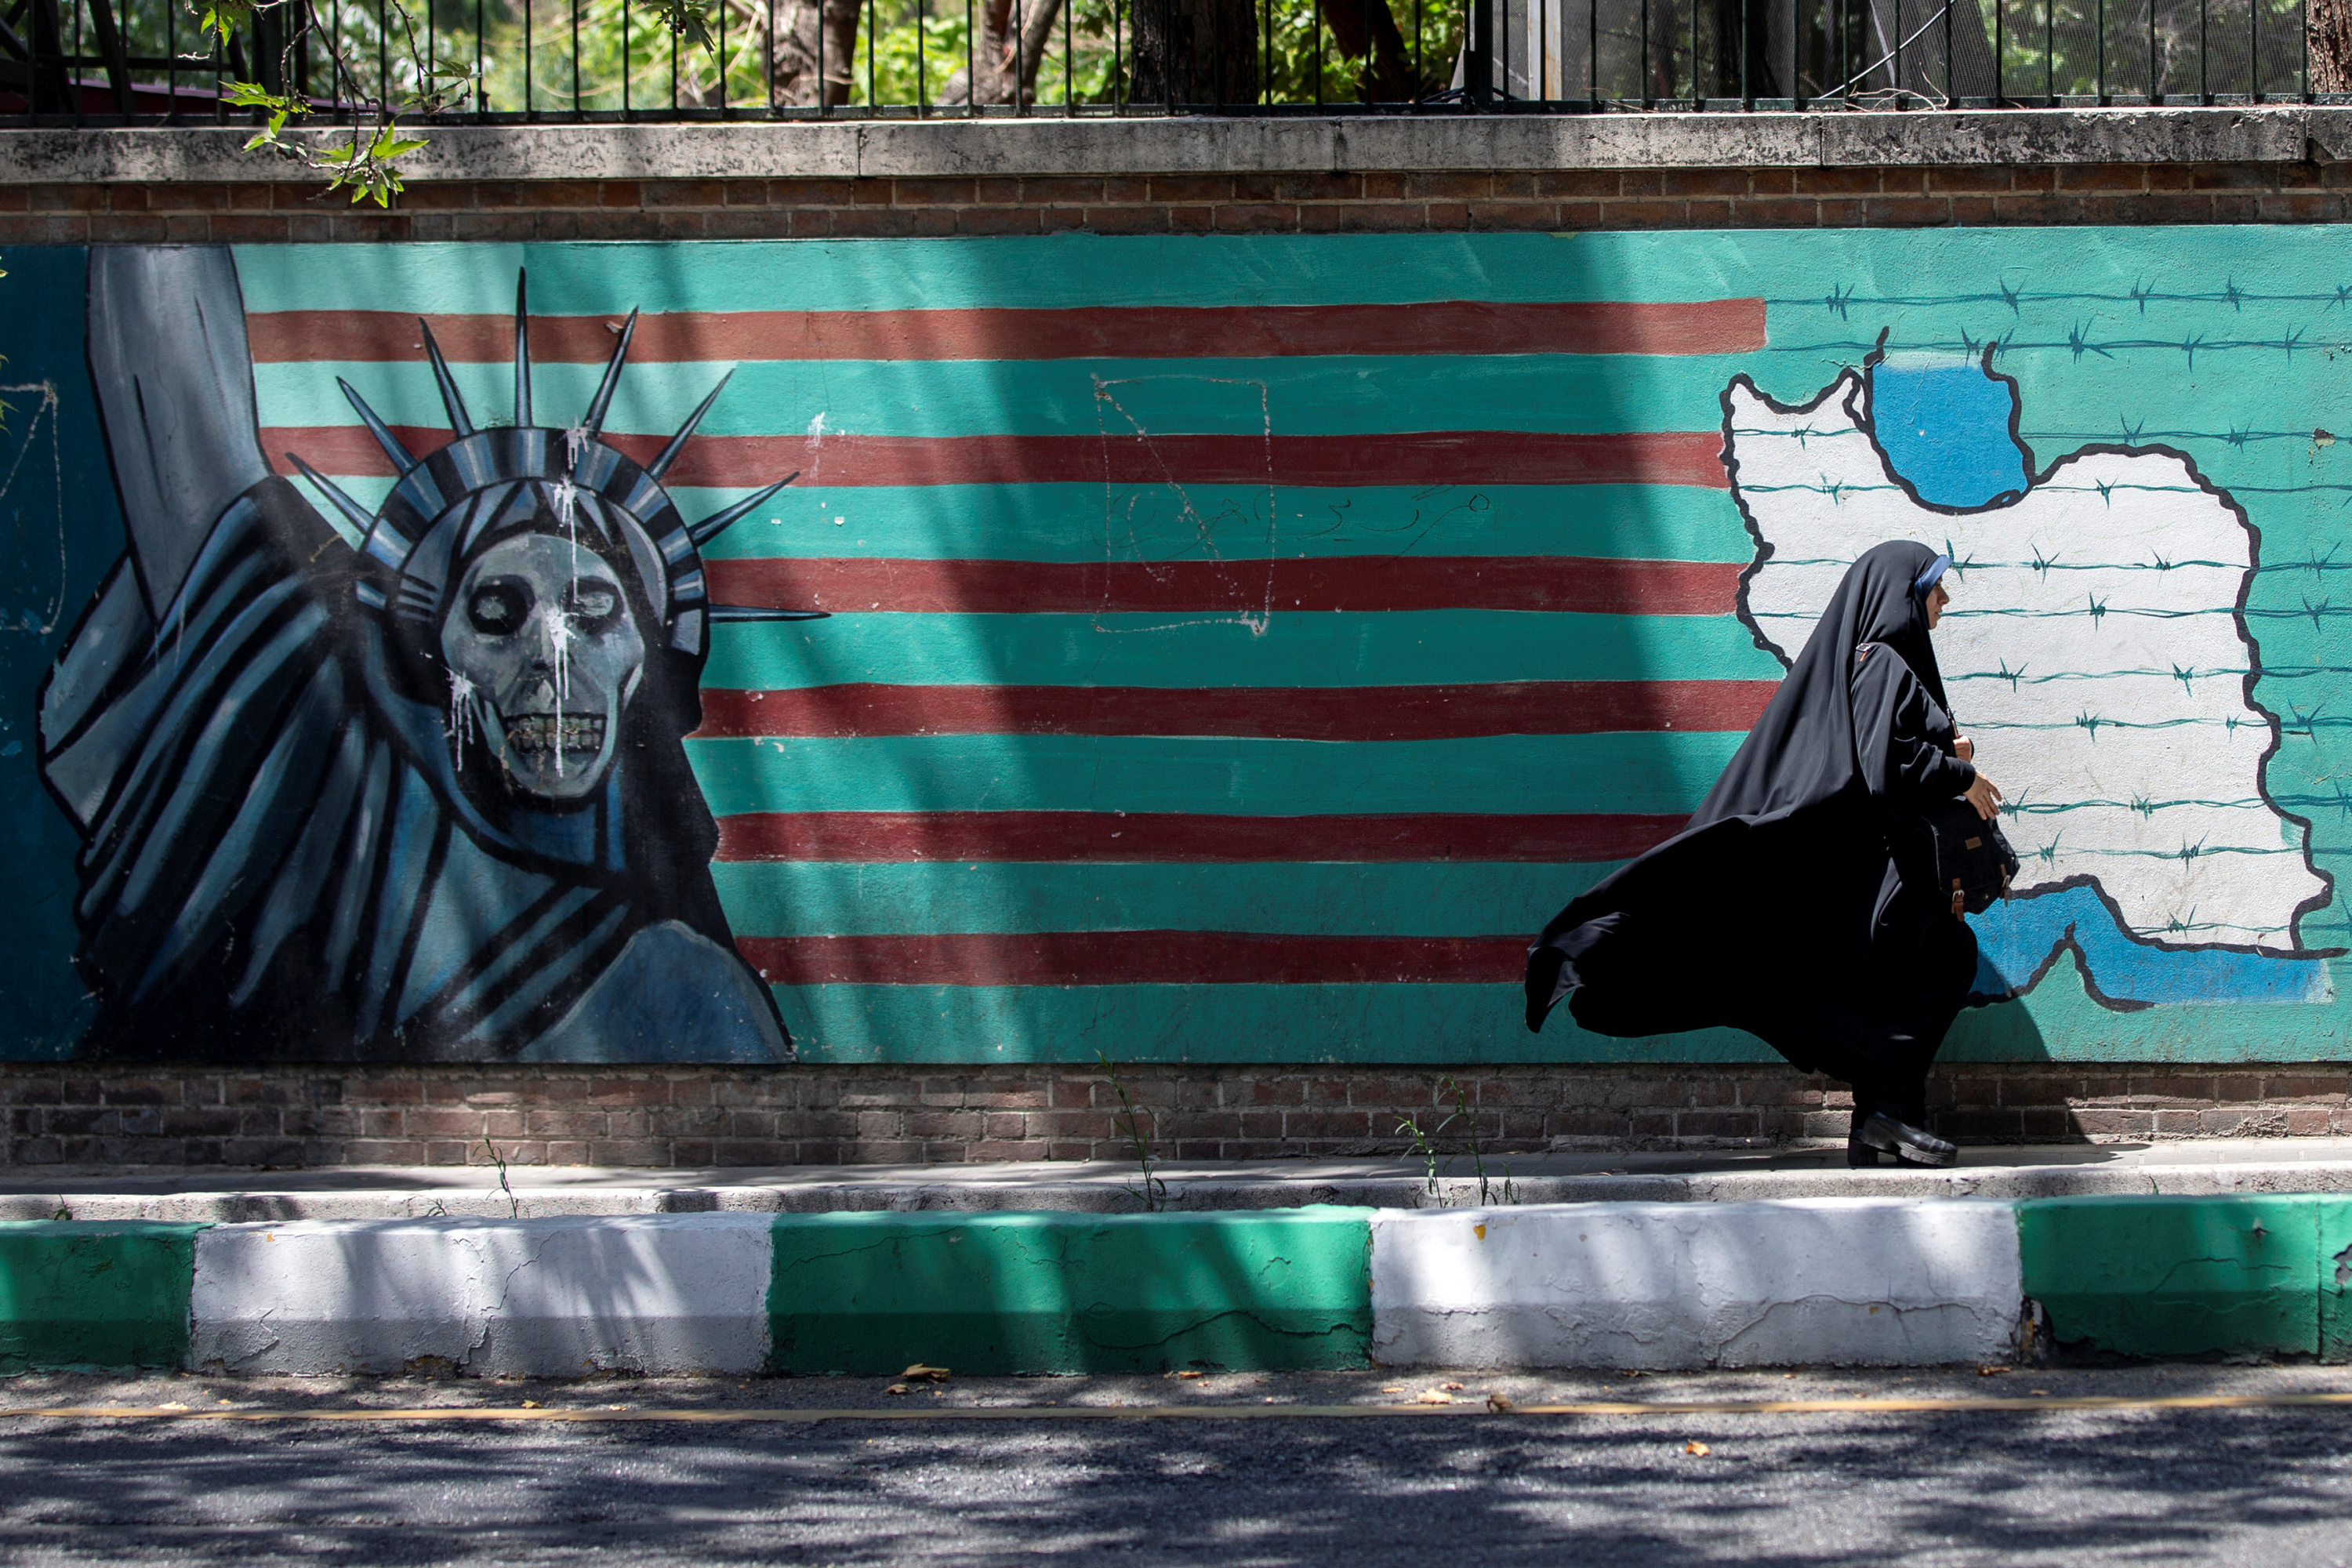 A woman walks past the mural showing U.S. flag with barbed wire and the Statue Of Liberty with skull face in Tehran